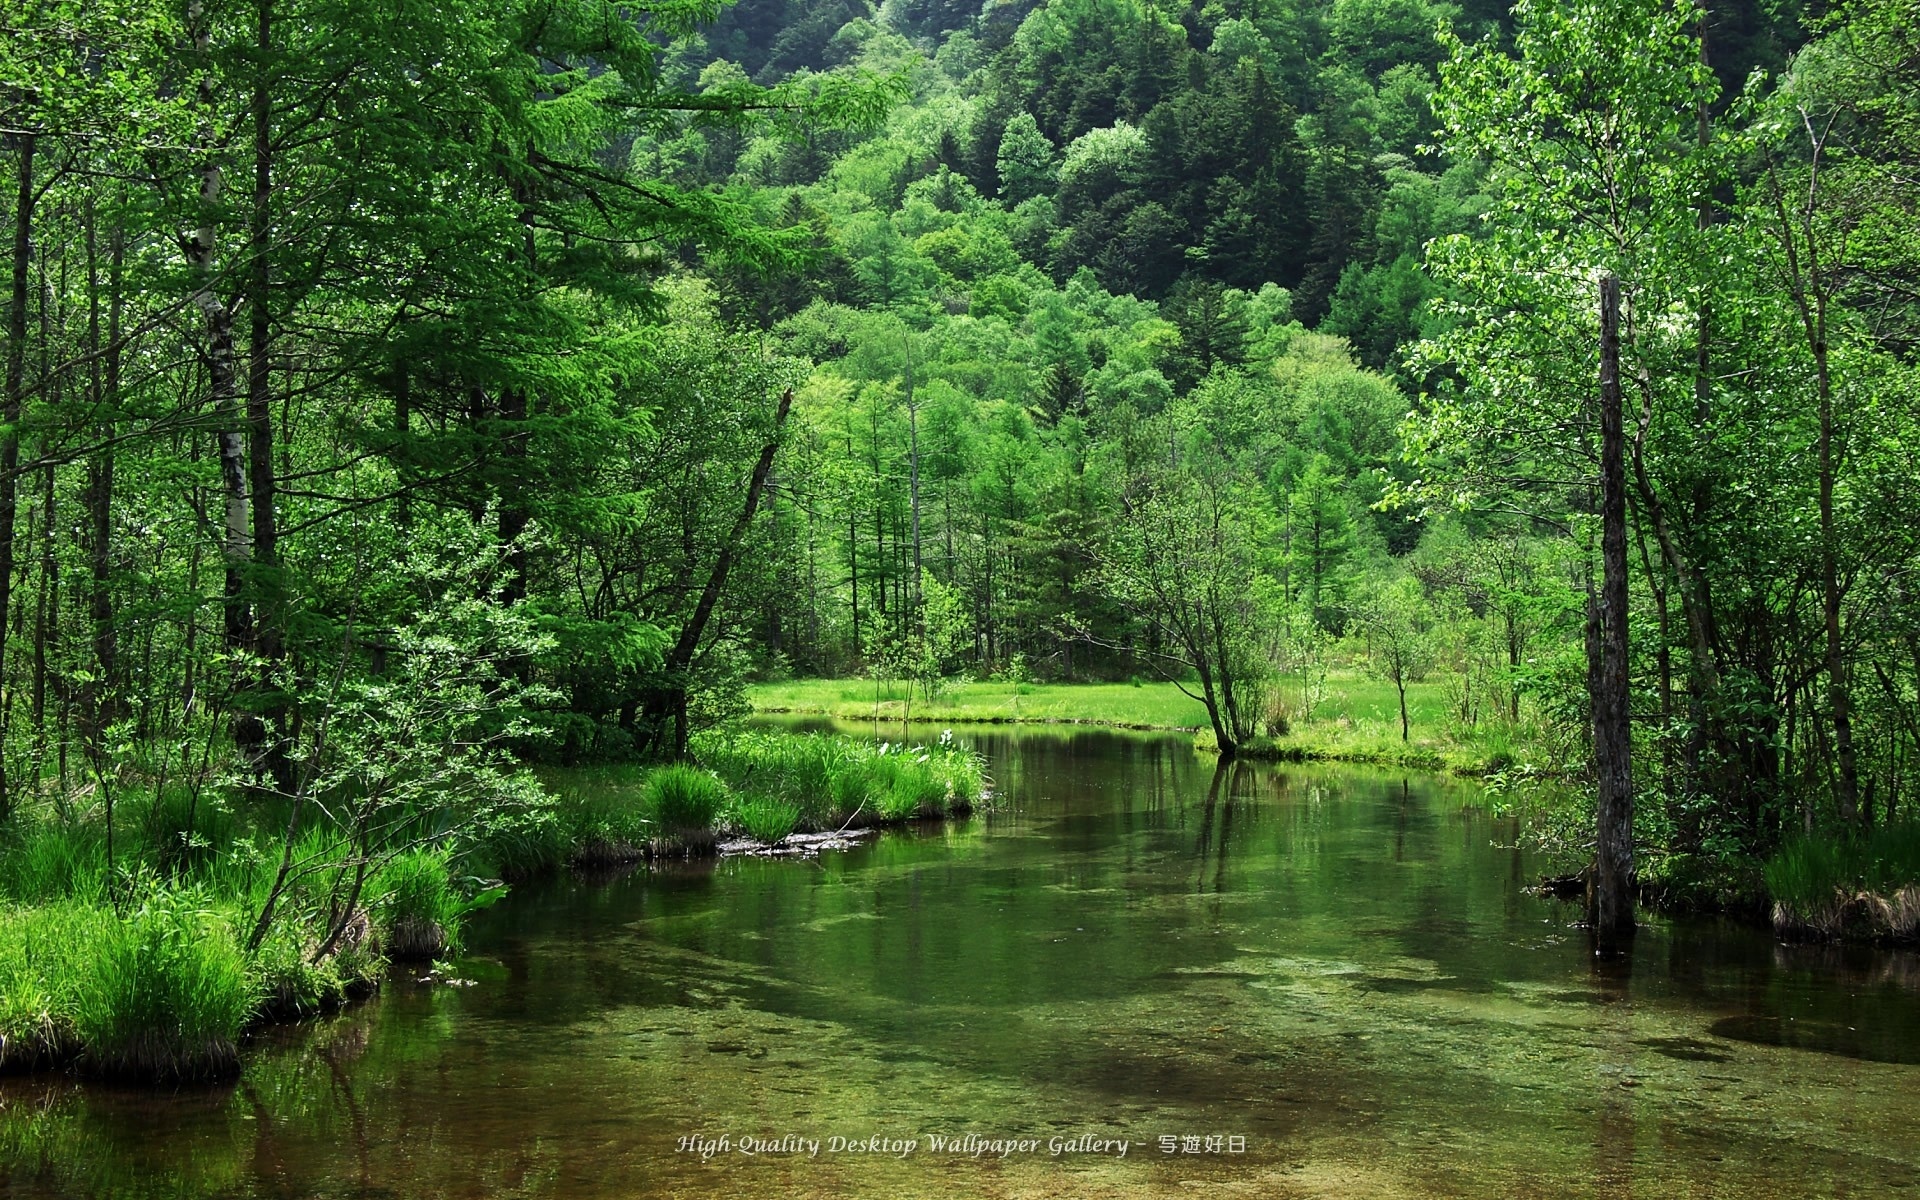 nature, Landscapes, Rivers, Stream, Water, Banks, Shore, Trees, Forest, Hills, Green, Spring, Seasons, Reflection Wallpaper